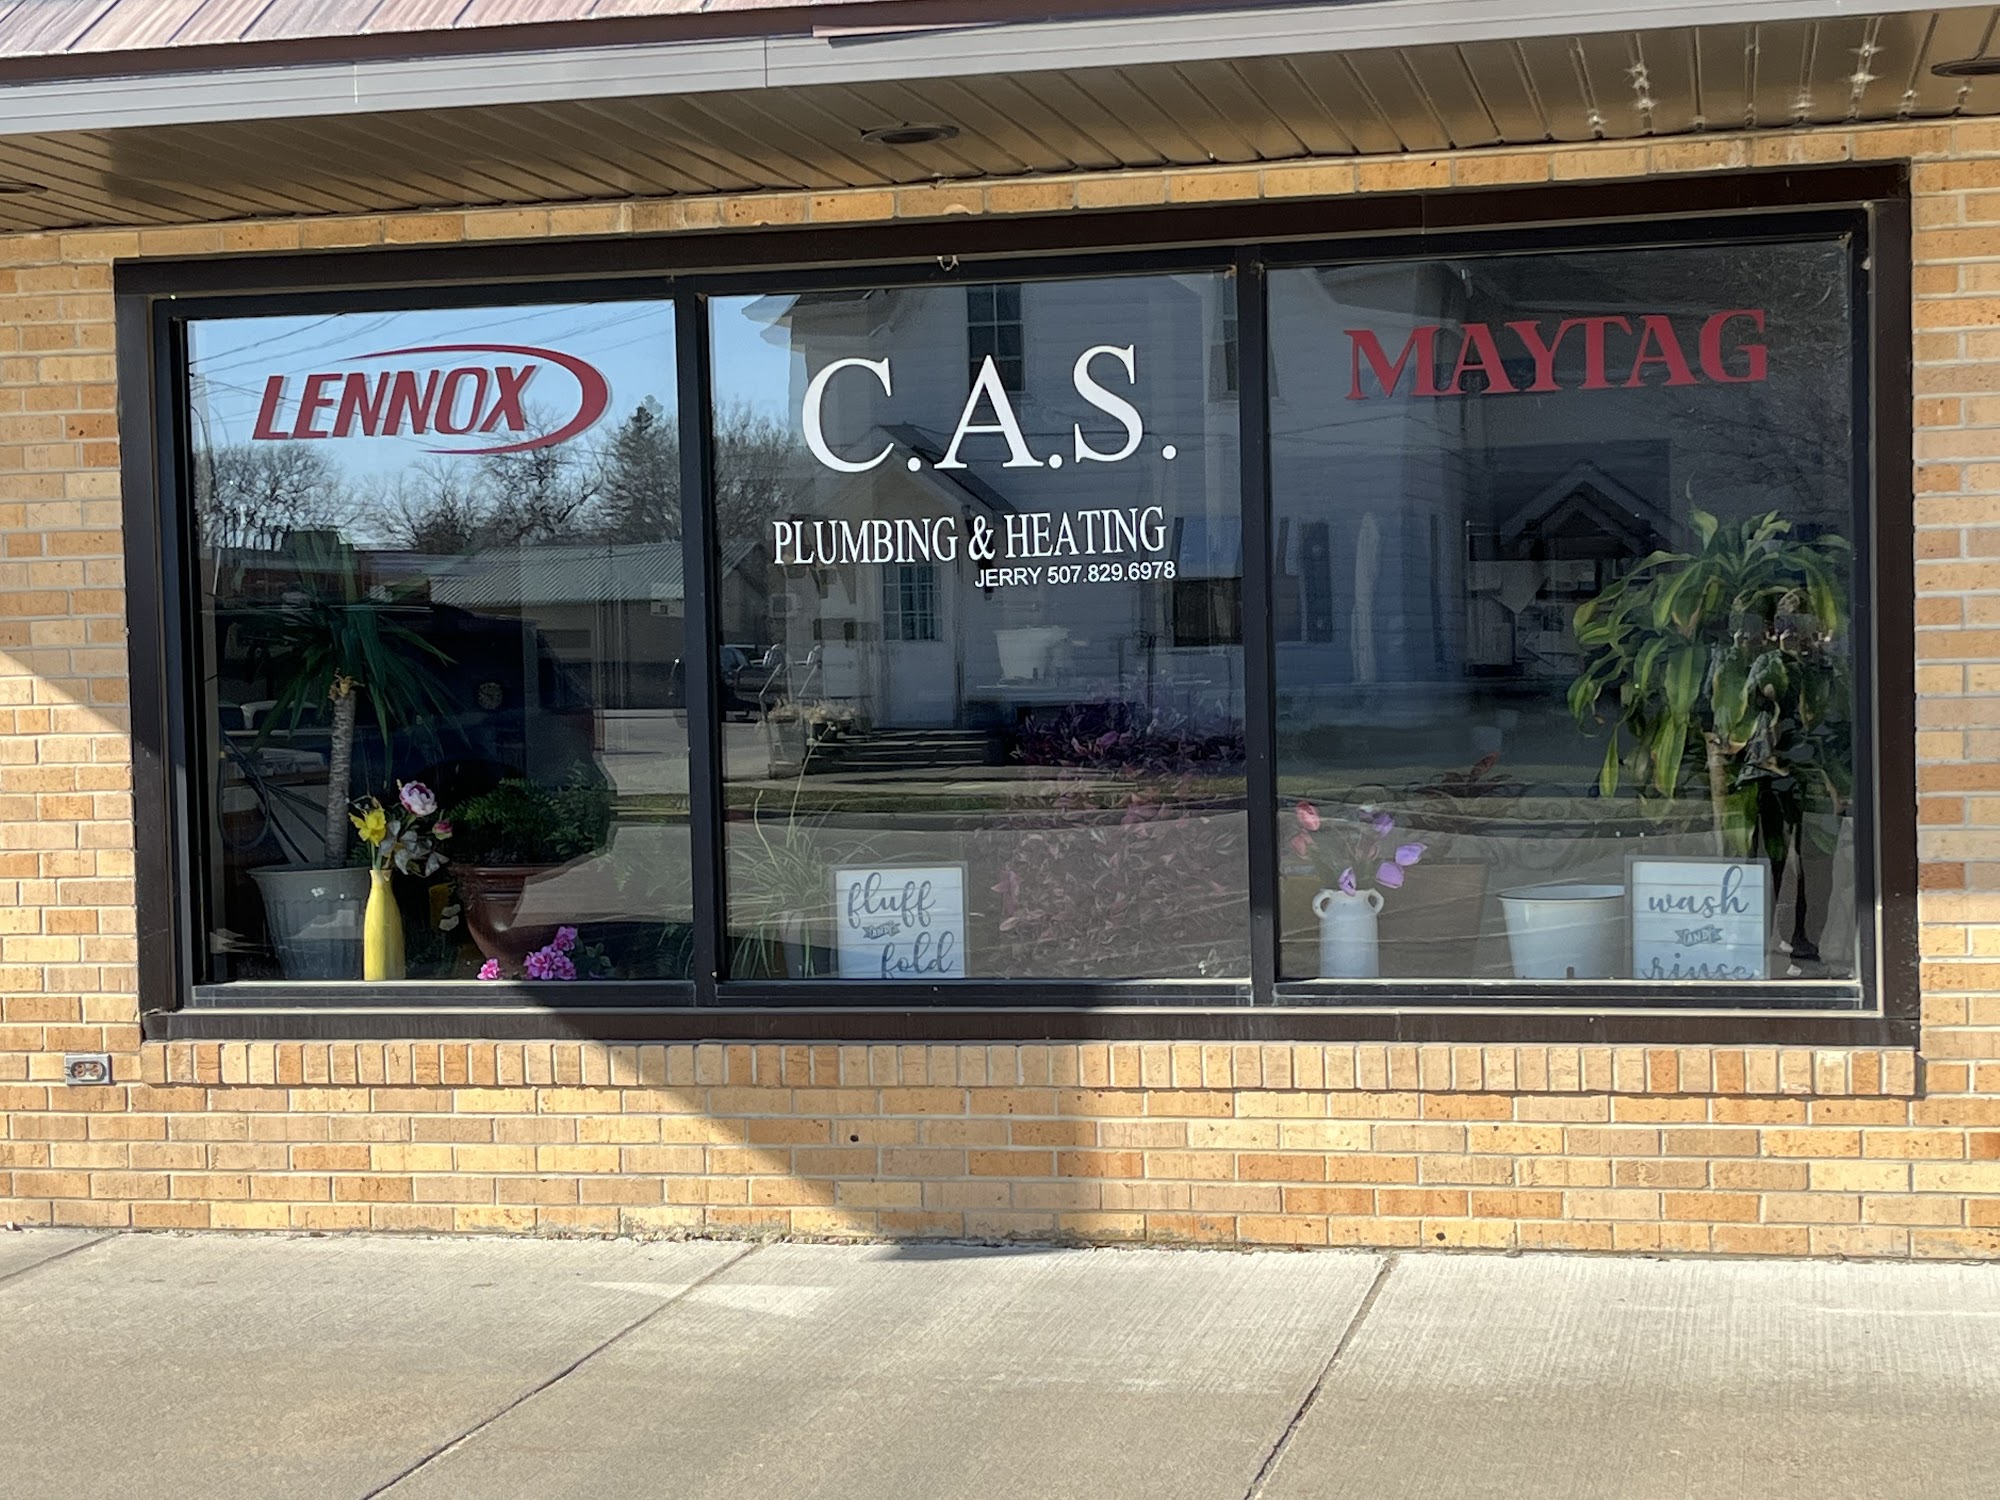 CAS Plumbing and Heating 110 2nd St W, Canby Minnesota 56220